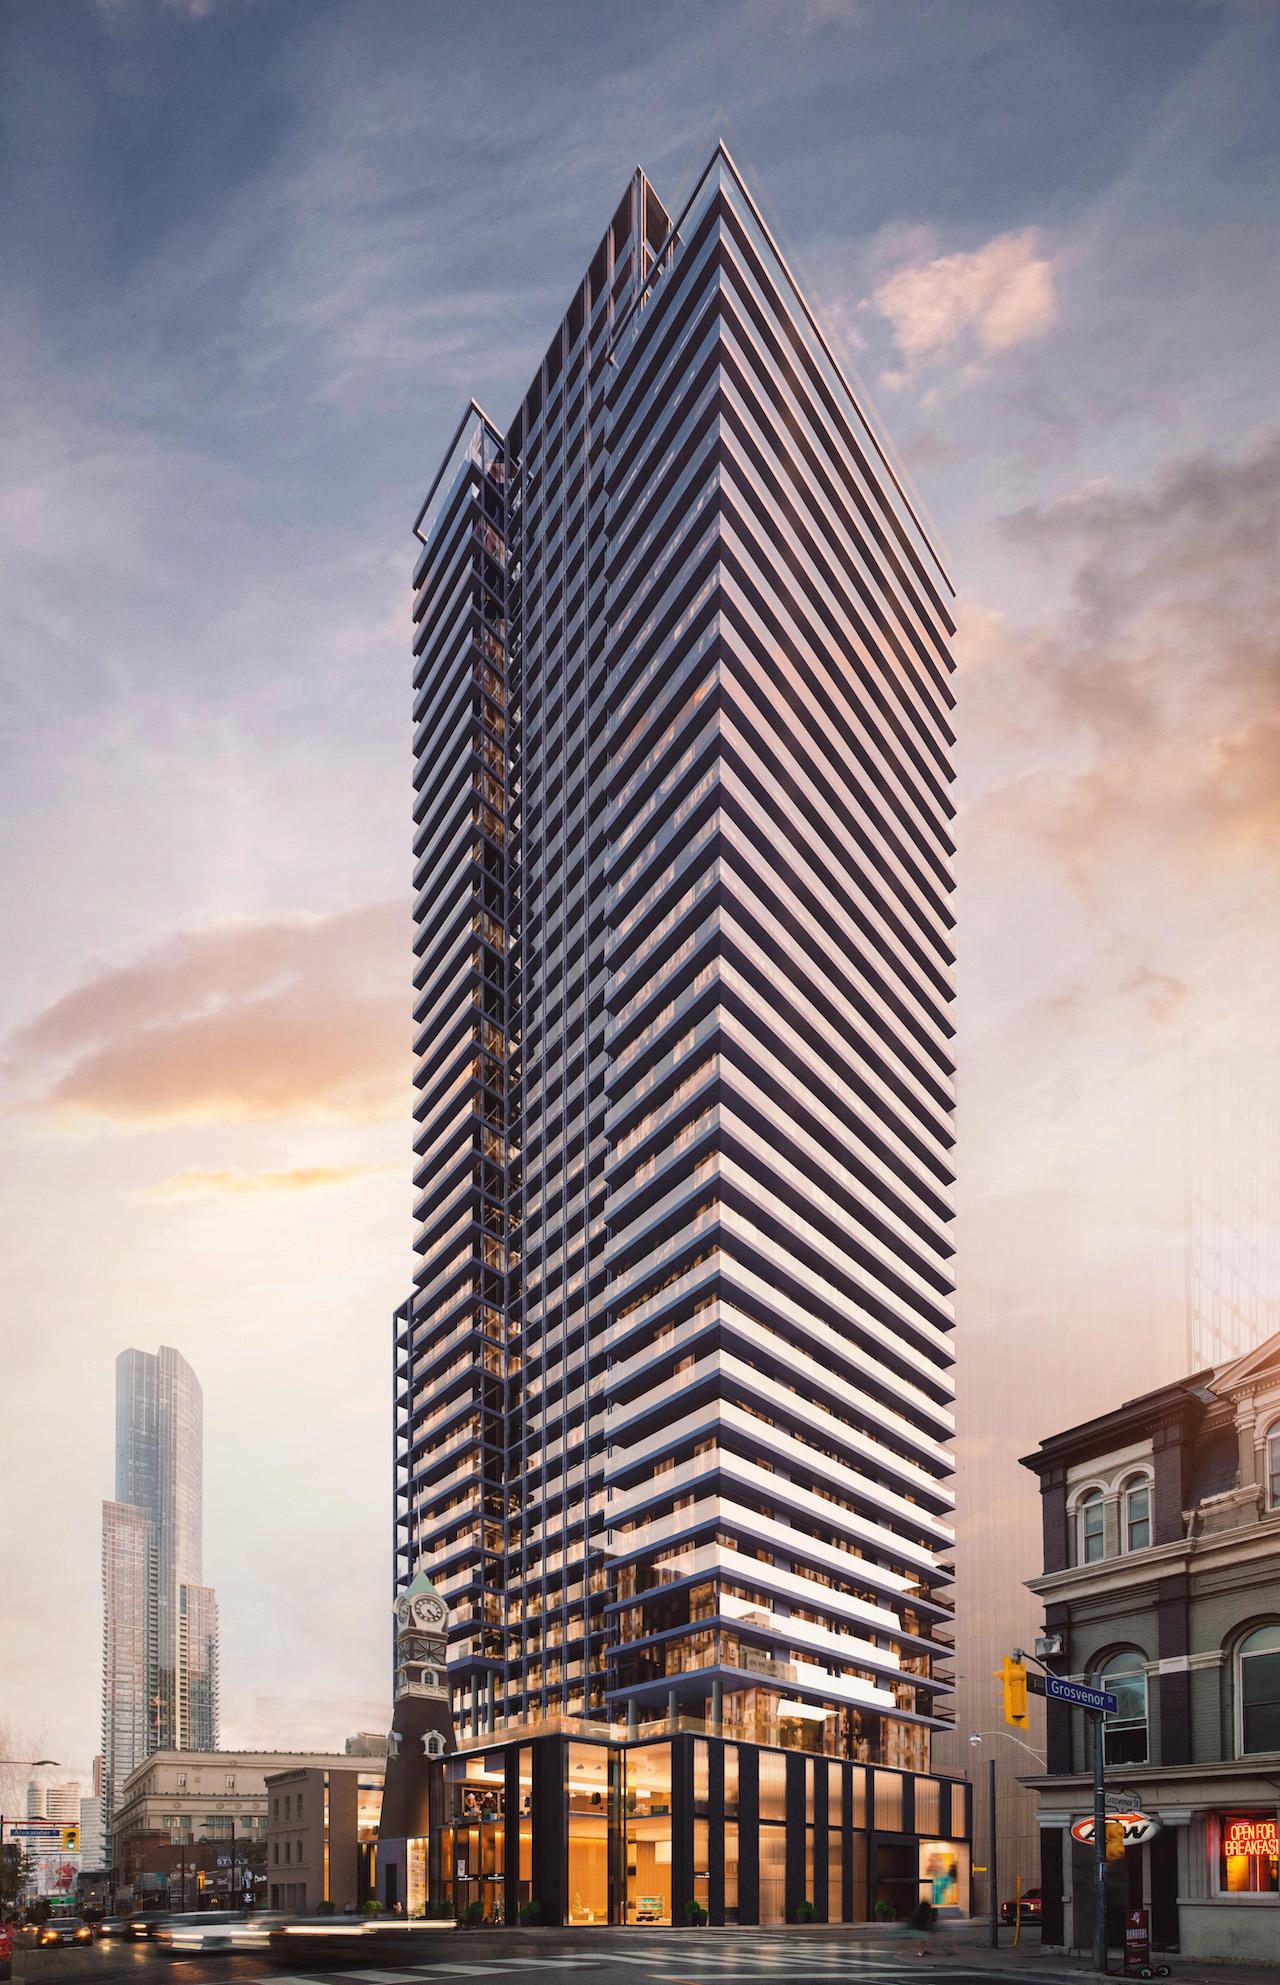 Halo Residences on Yonge, designed by architects—Alliance, construction completed by QuadReal Property Group